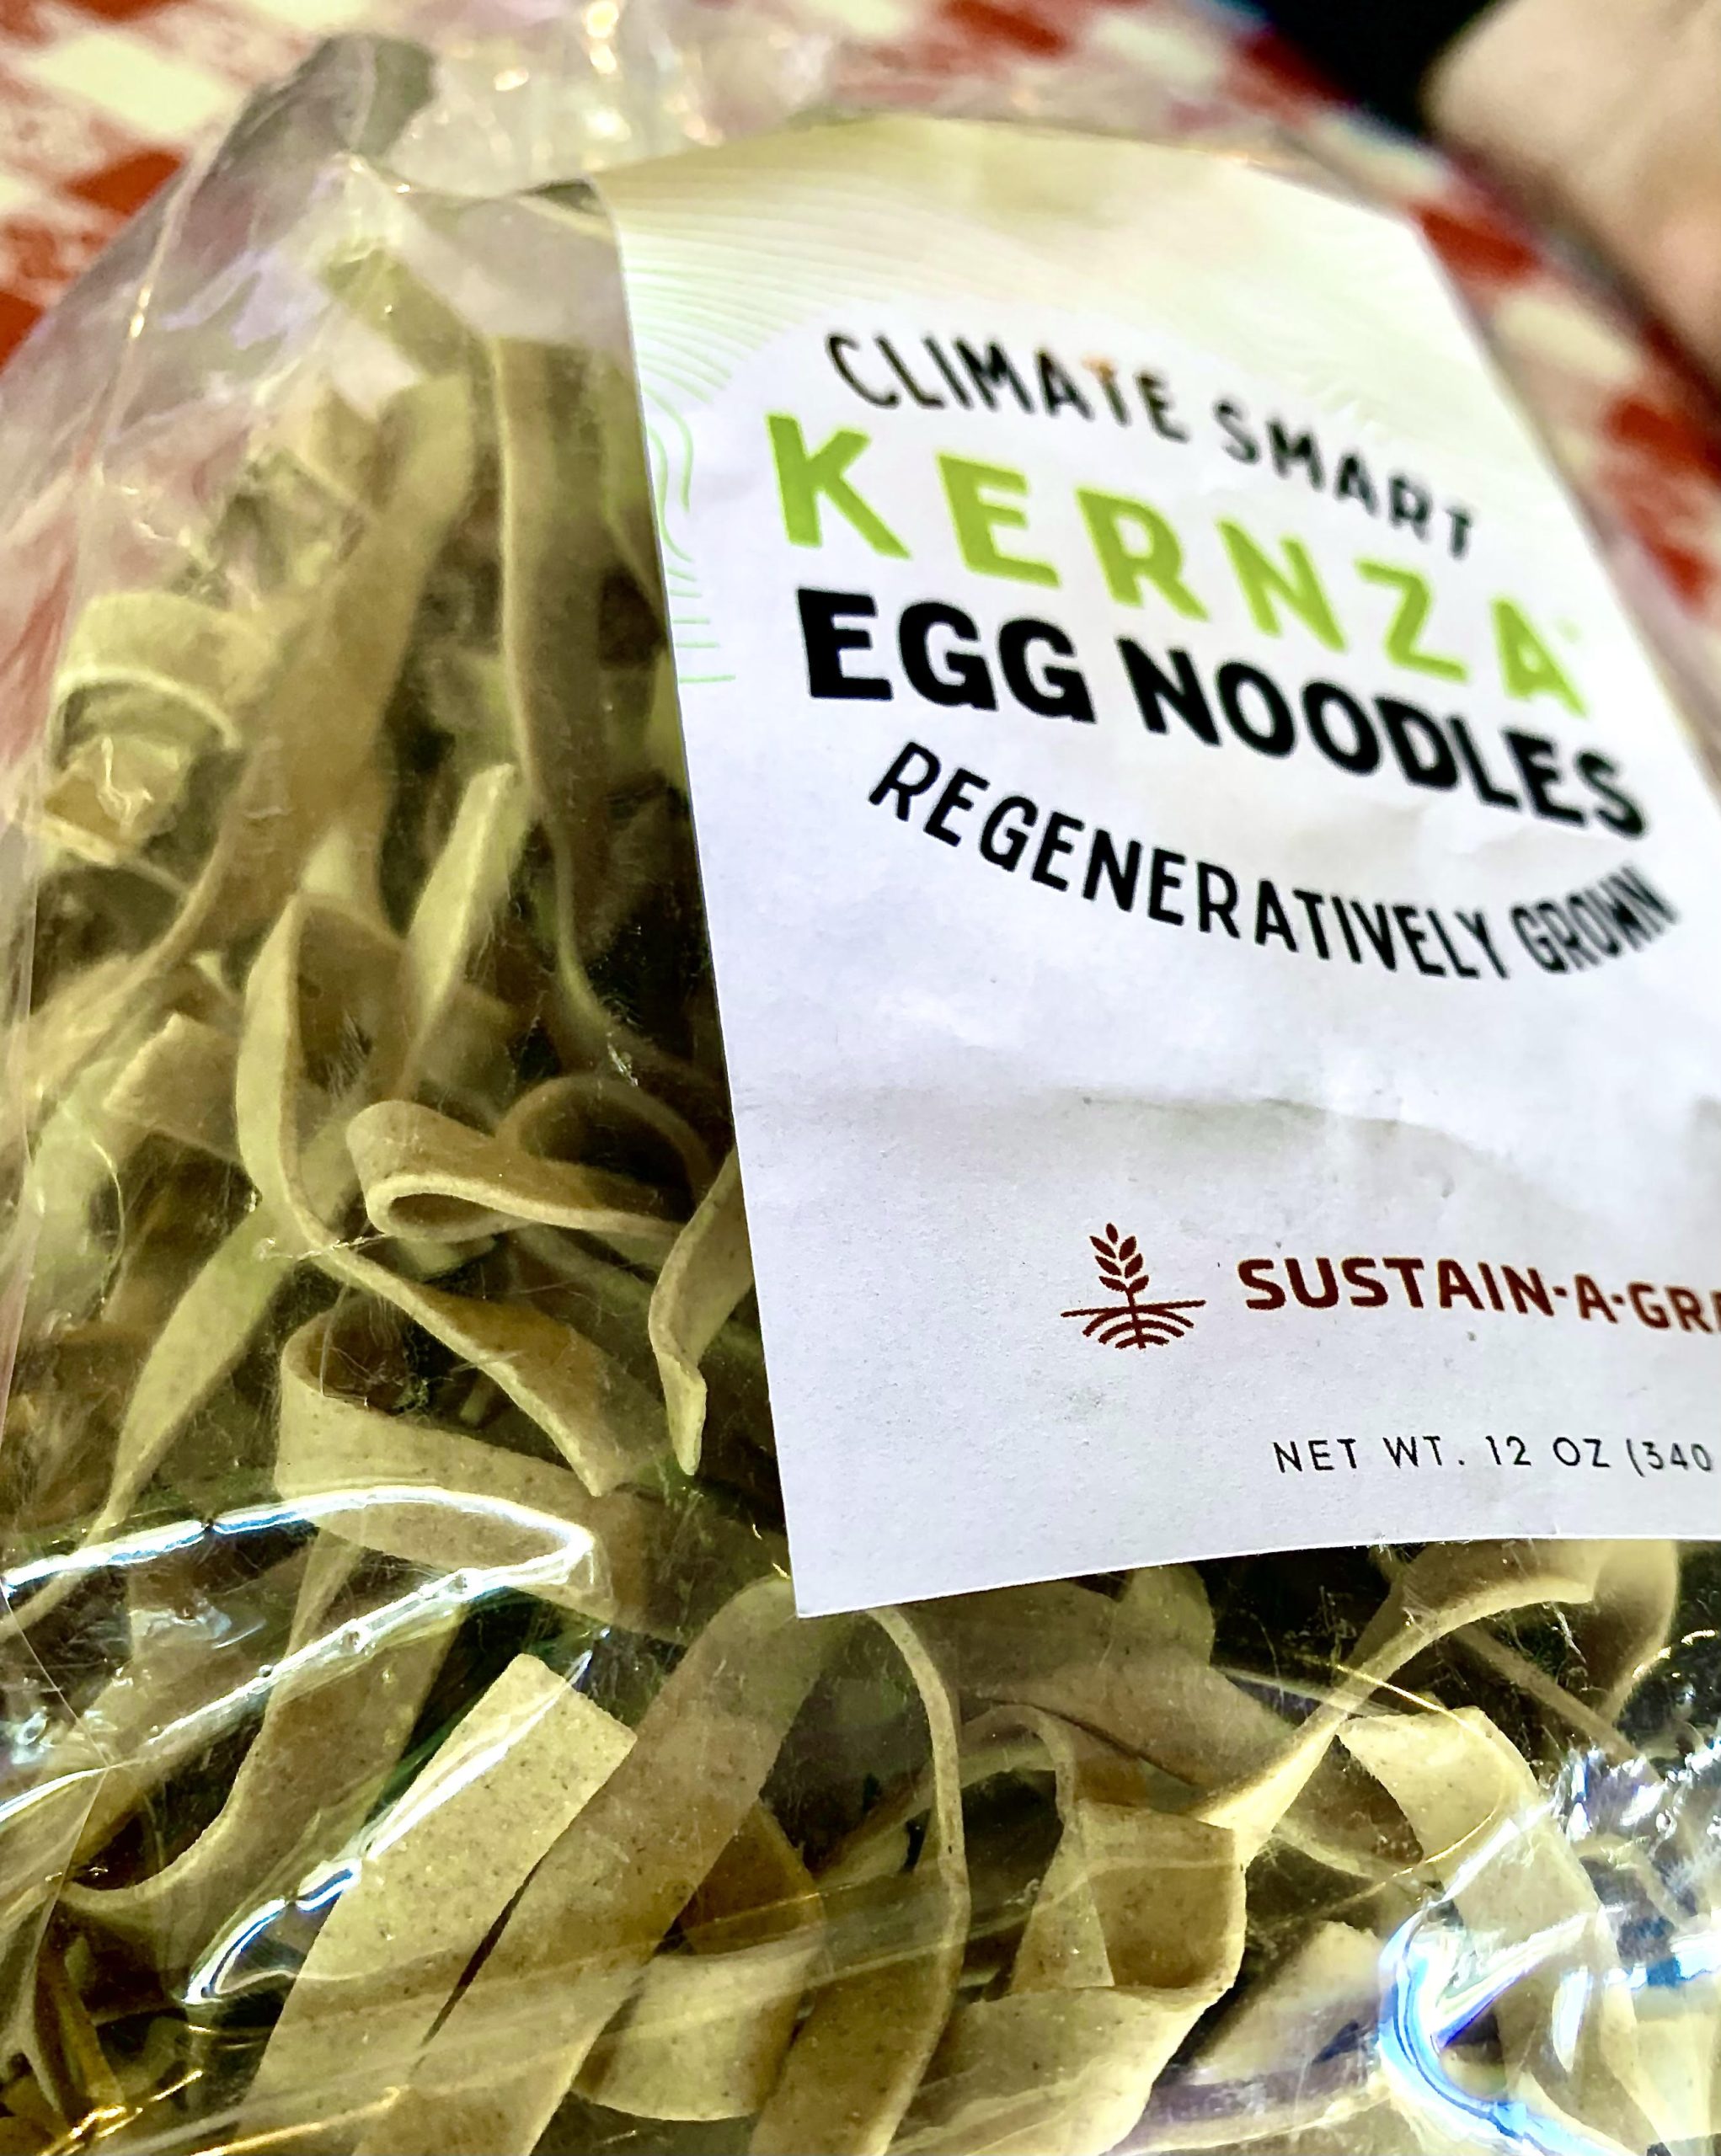 A bag of Kernza egg noodles is among the products marketed by Sustain-A-Grain. (Photo by Tim Unruh.)